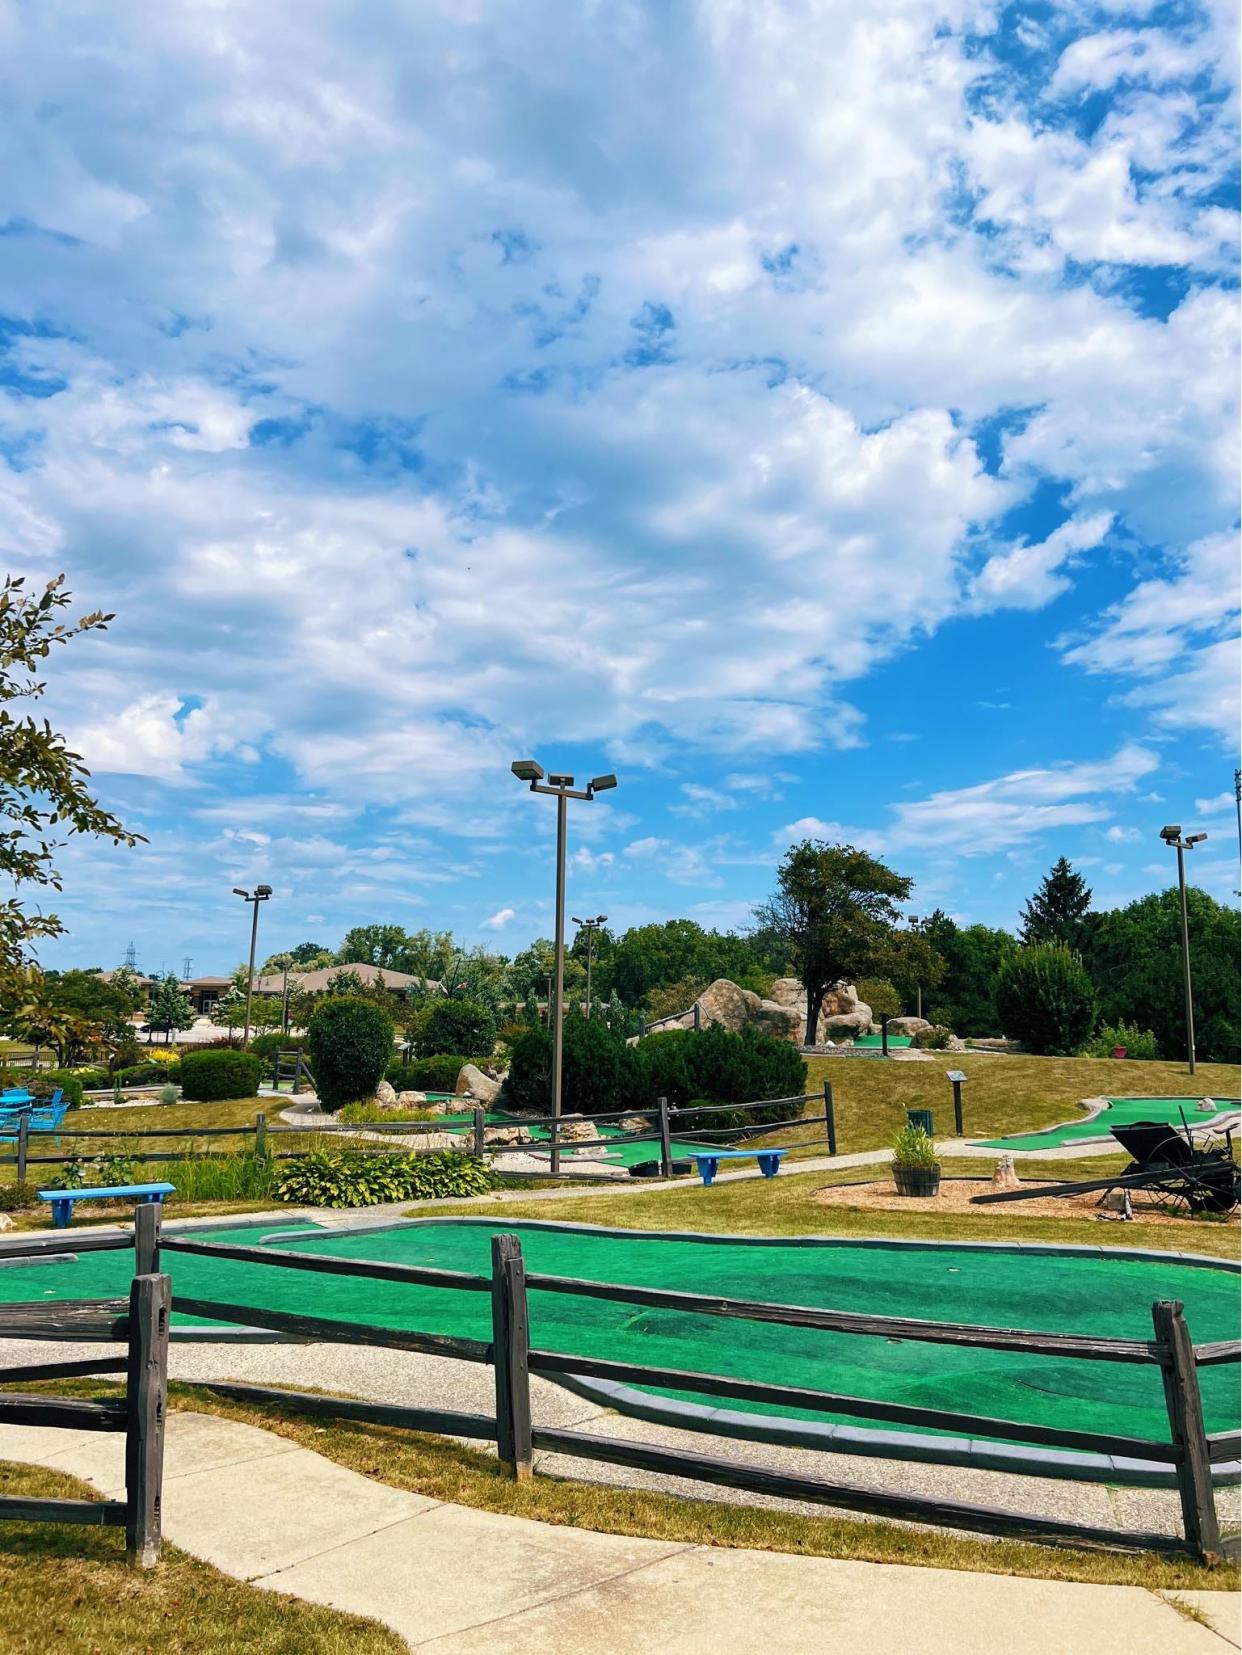 Holey Mackerel opened Aug. 10 in Greenfield featuring mini golf, batting cages and arcade games with more activities to come in the next year.